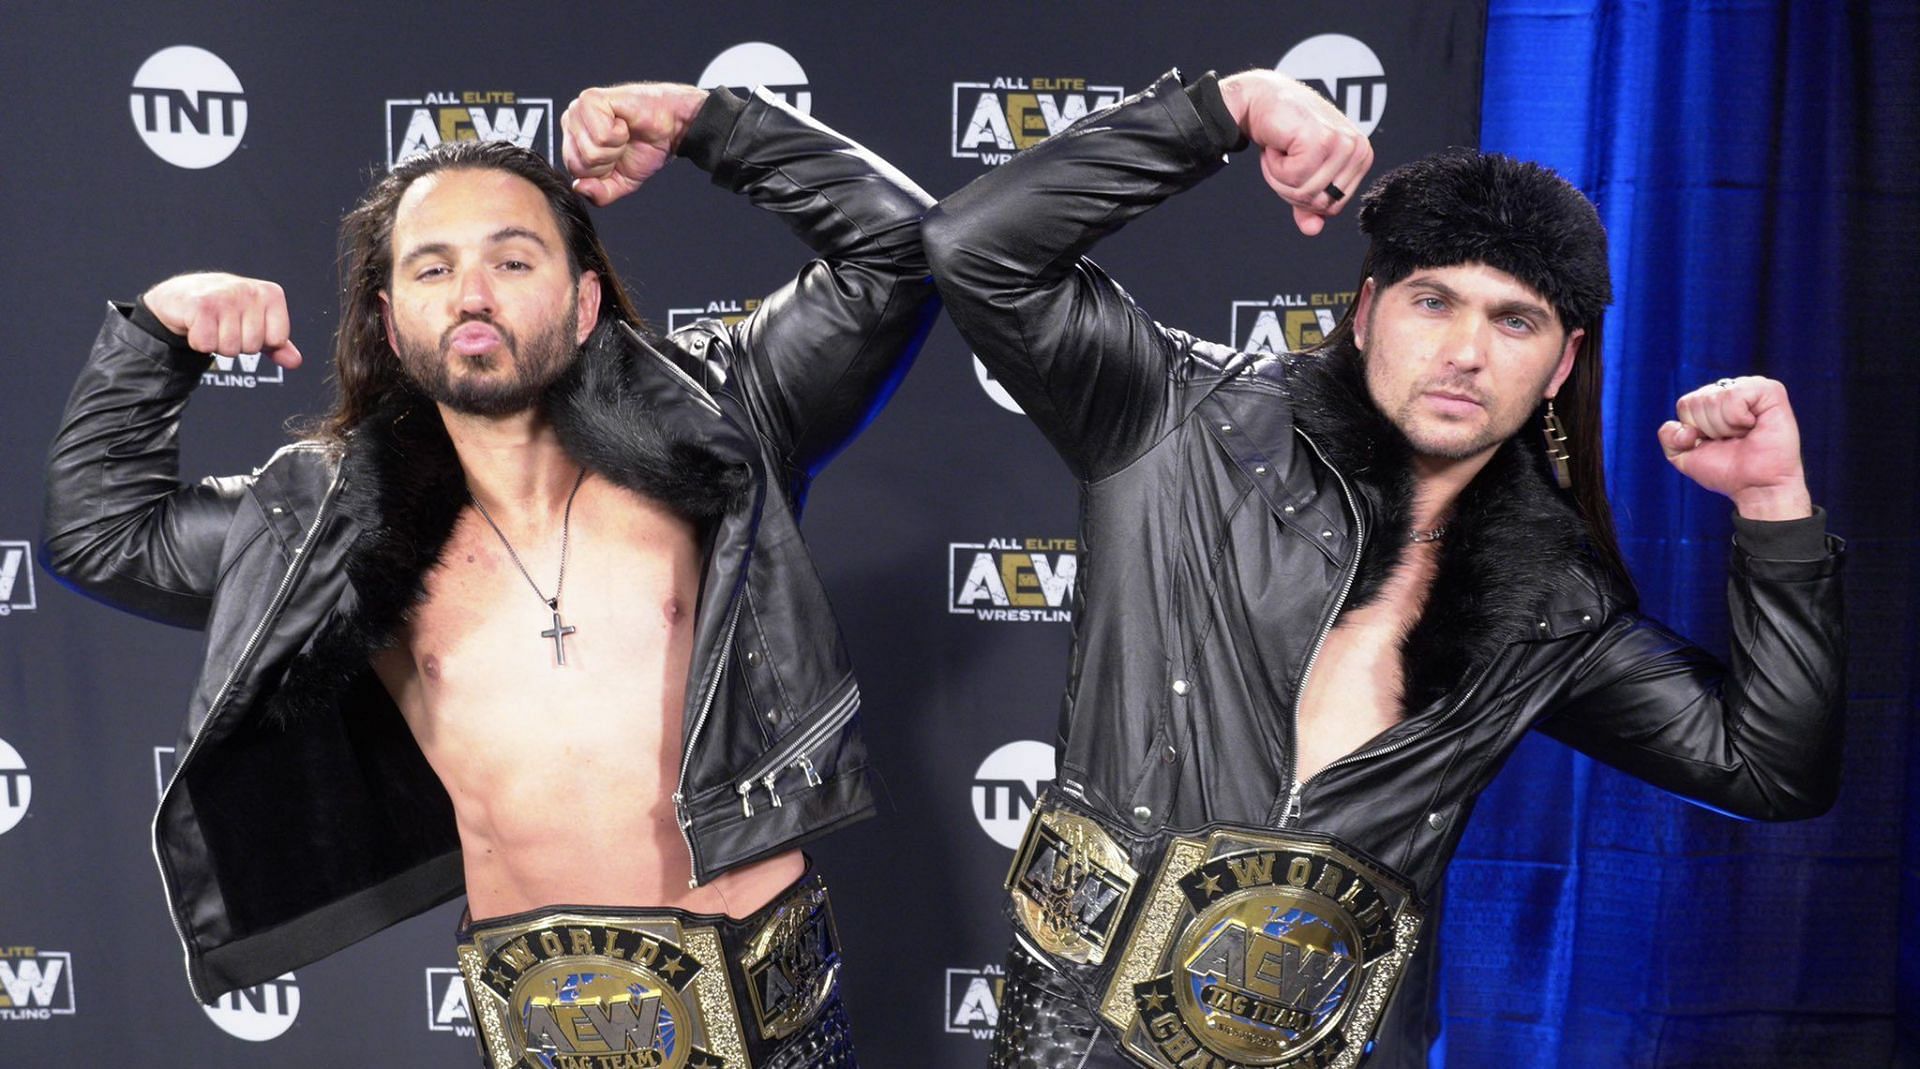 The Young Bucks gave up and coming young wrestlers a chance in AEW